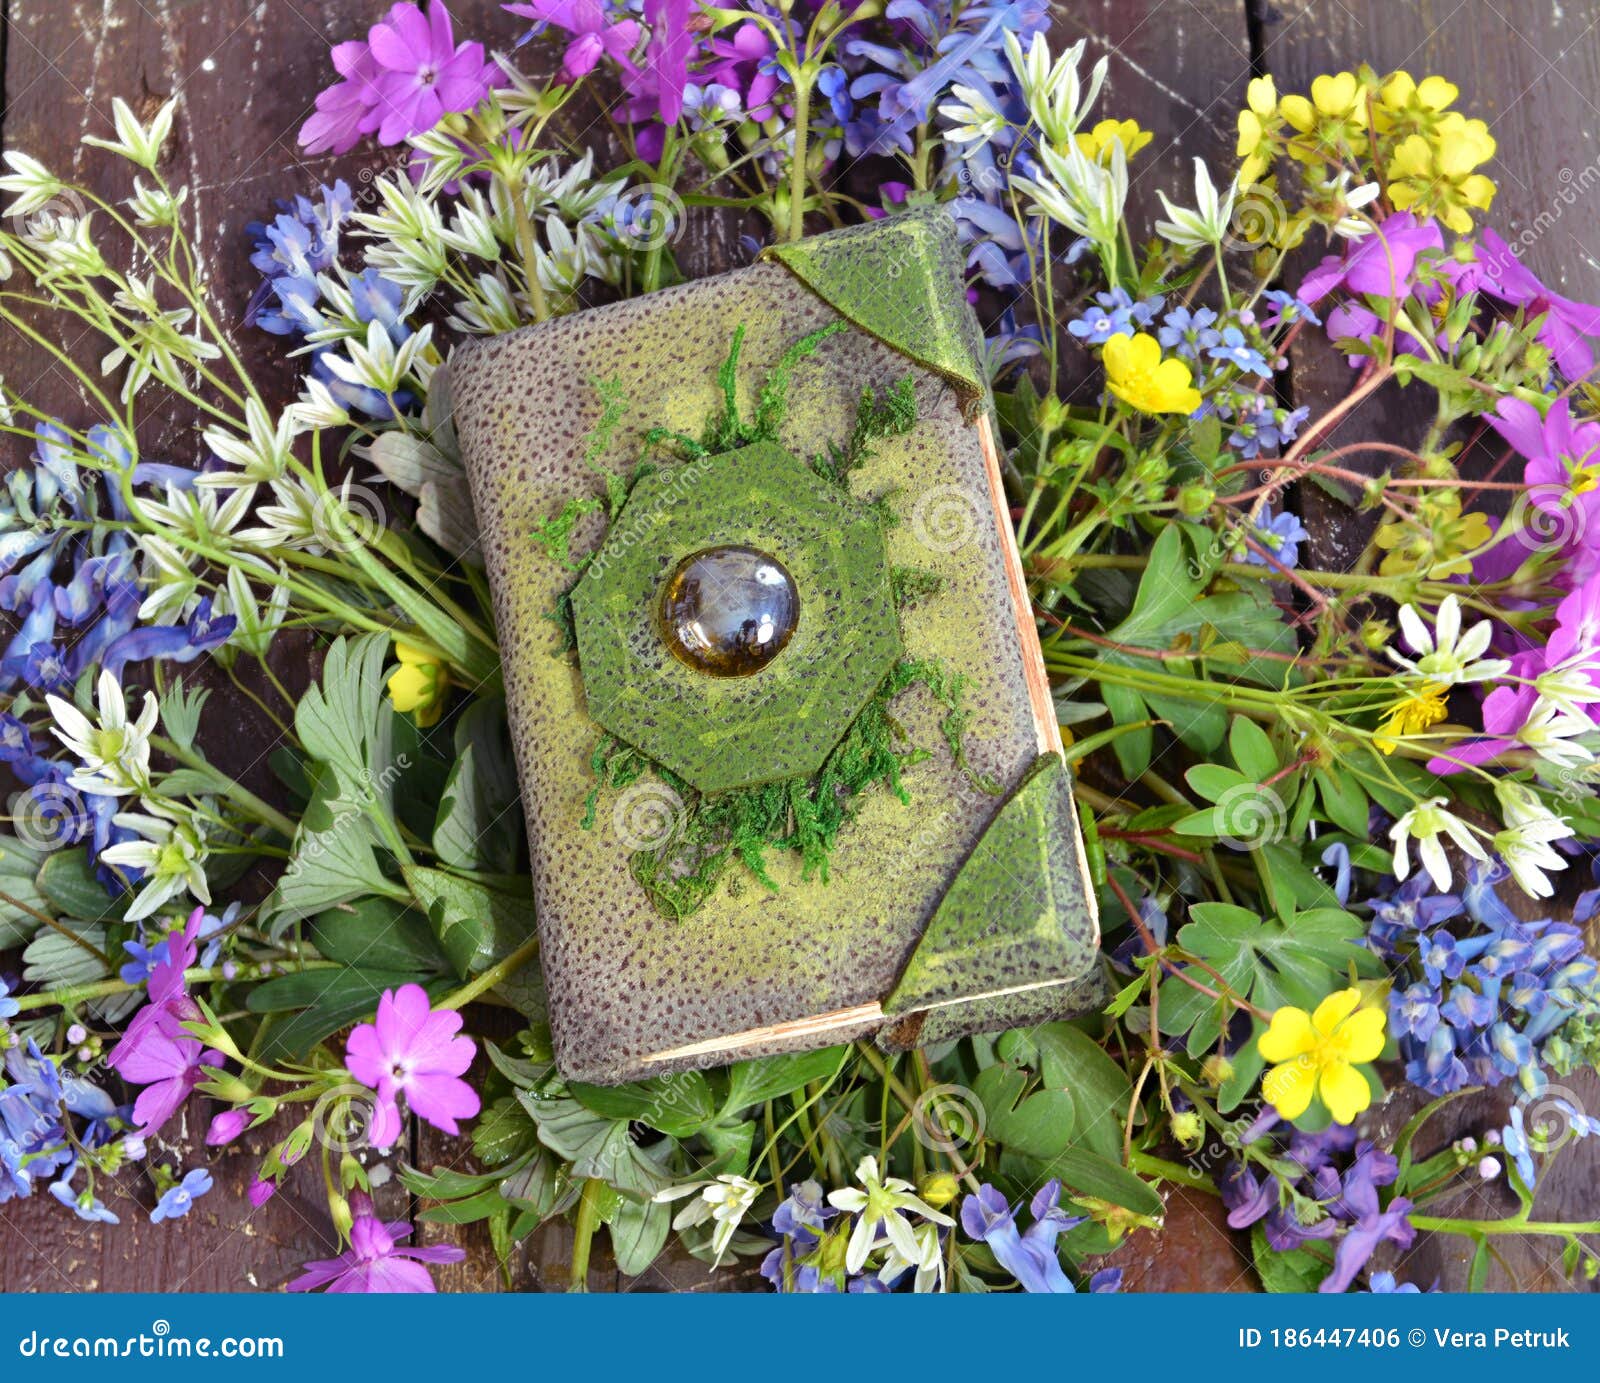 Top View of Green Witch Book on Wildflowers Stock Photo - Image of planks,  adorable: 186447406